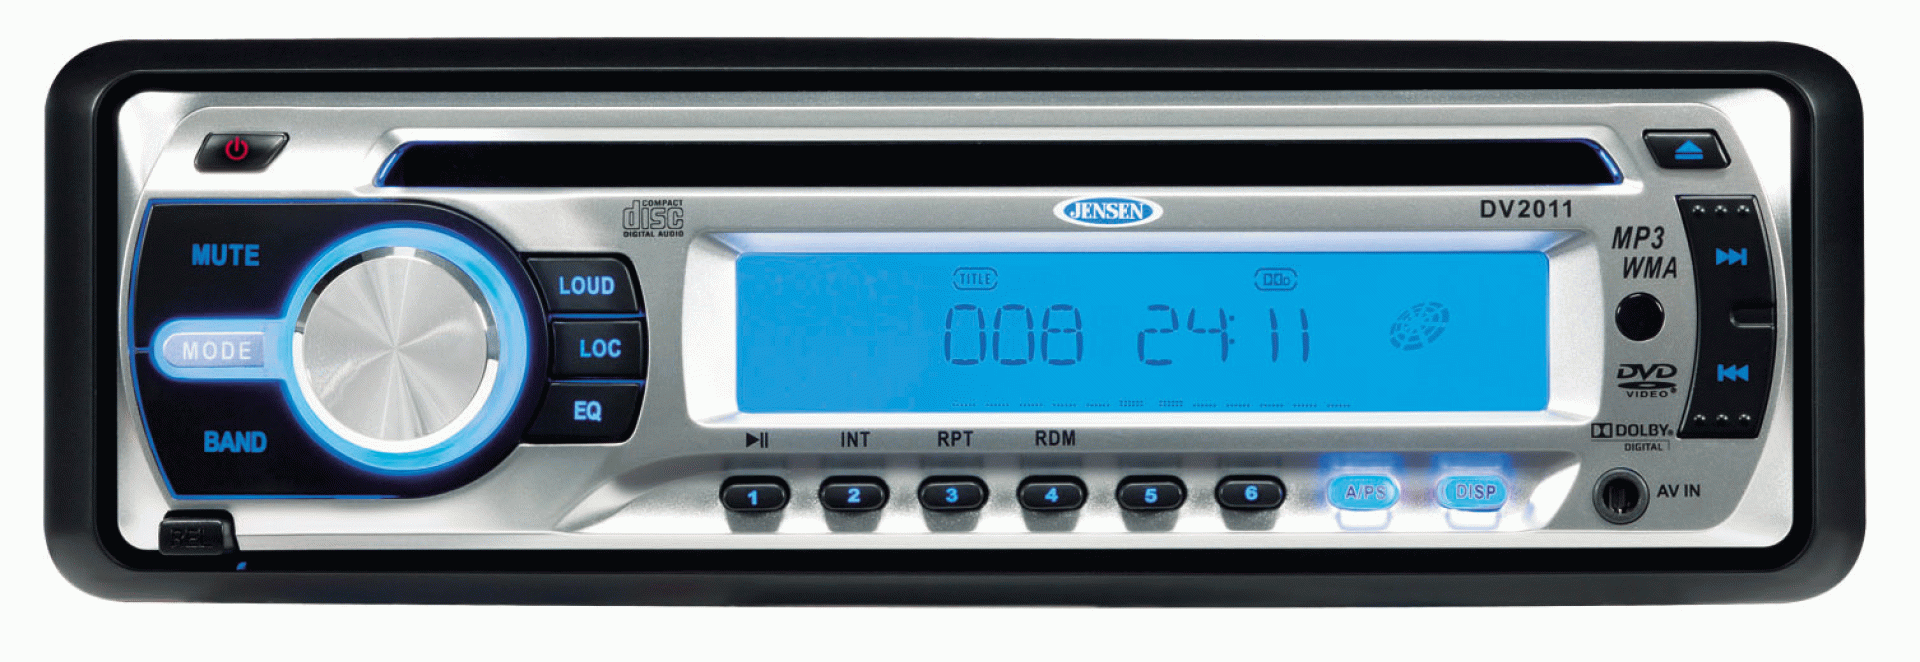 ASA / Jensen | DV2011 | AM/ FM/ CD/ CD-R/ CD-RW/ MP3/ WMA DVD STEREO AND DVD PLAYER W/ WIRELESS REMOTE CONTROL